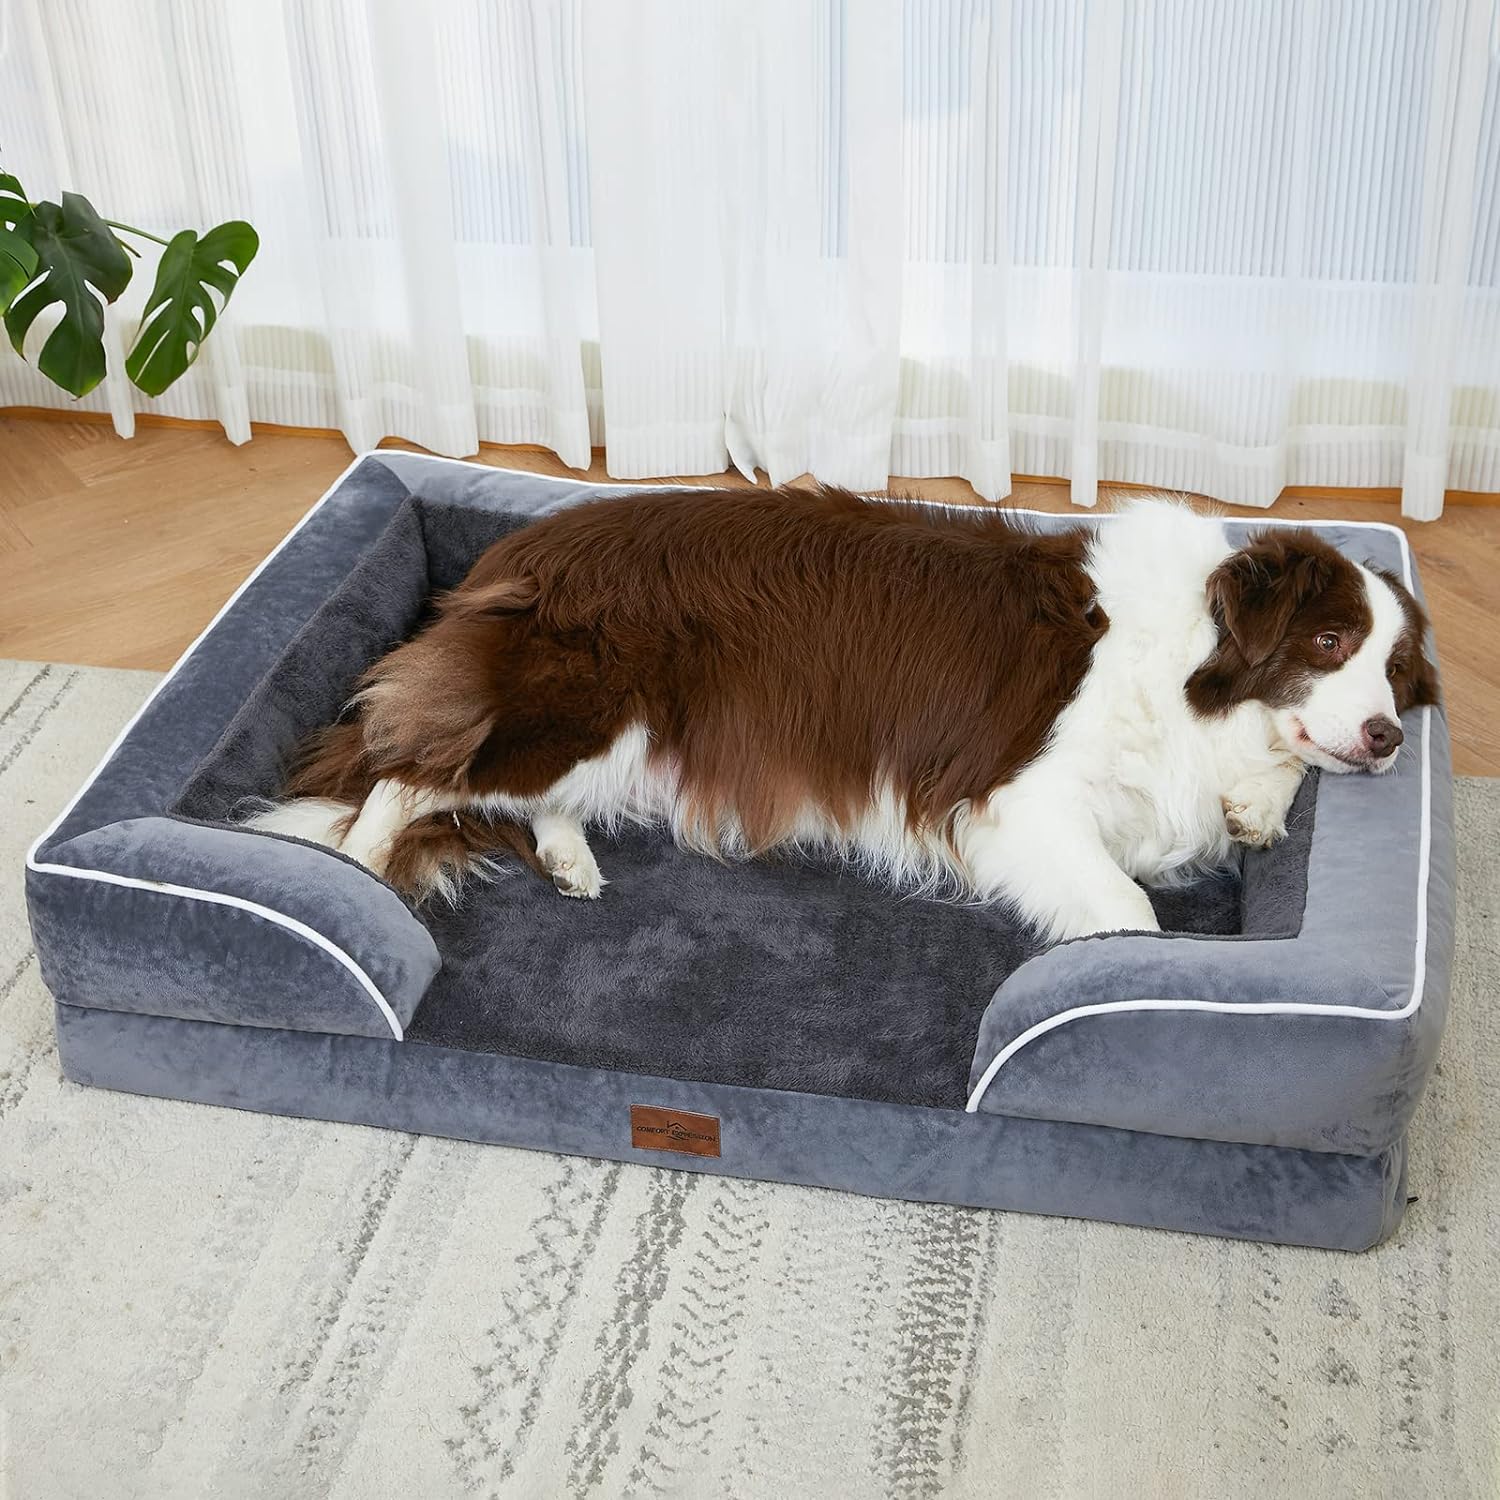 Waterproof Orthopedic Foam Dog Beds for Extra Large Dogs Durable Dog Sofa Pet Bed Washable Removable Cover with Zipper and Bolster